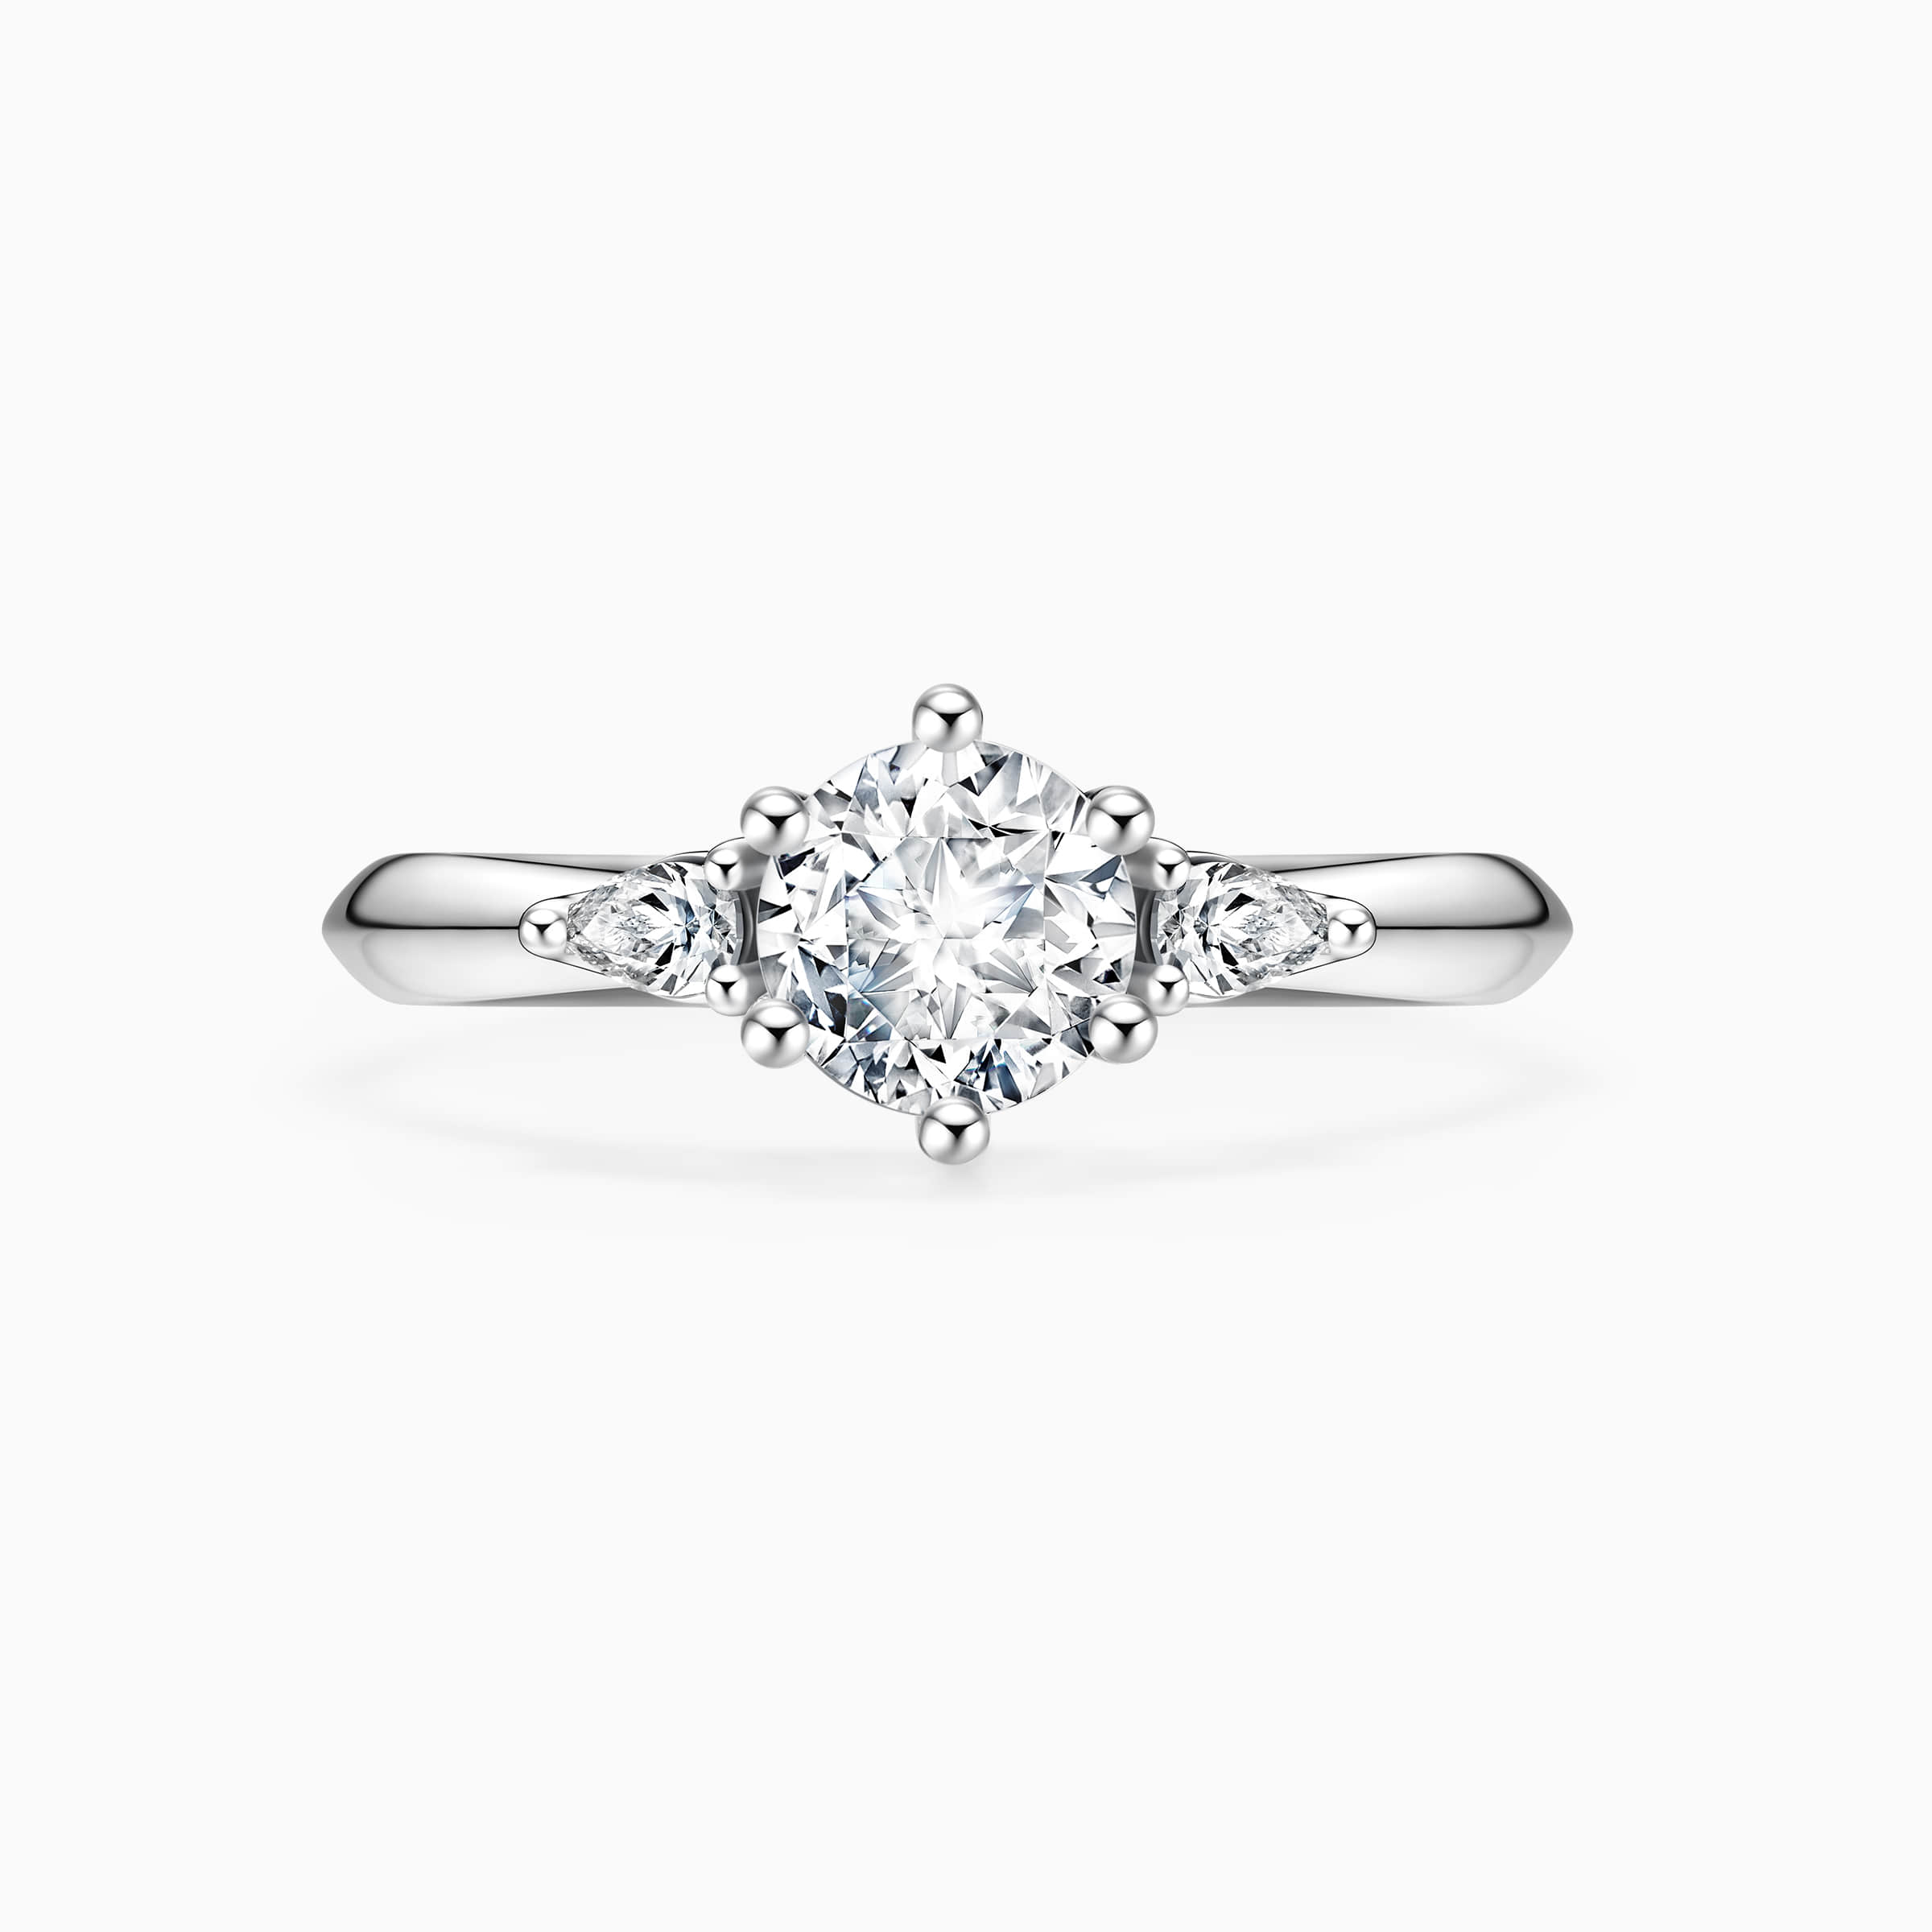 Darry Ring 3 stone engagement ring front view